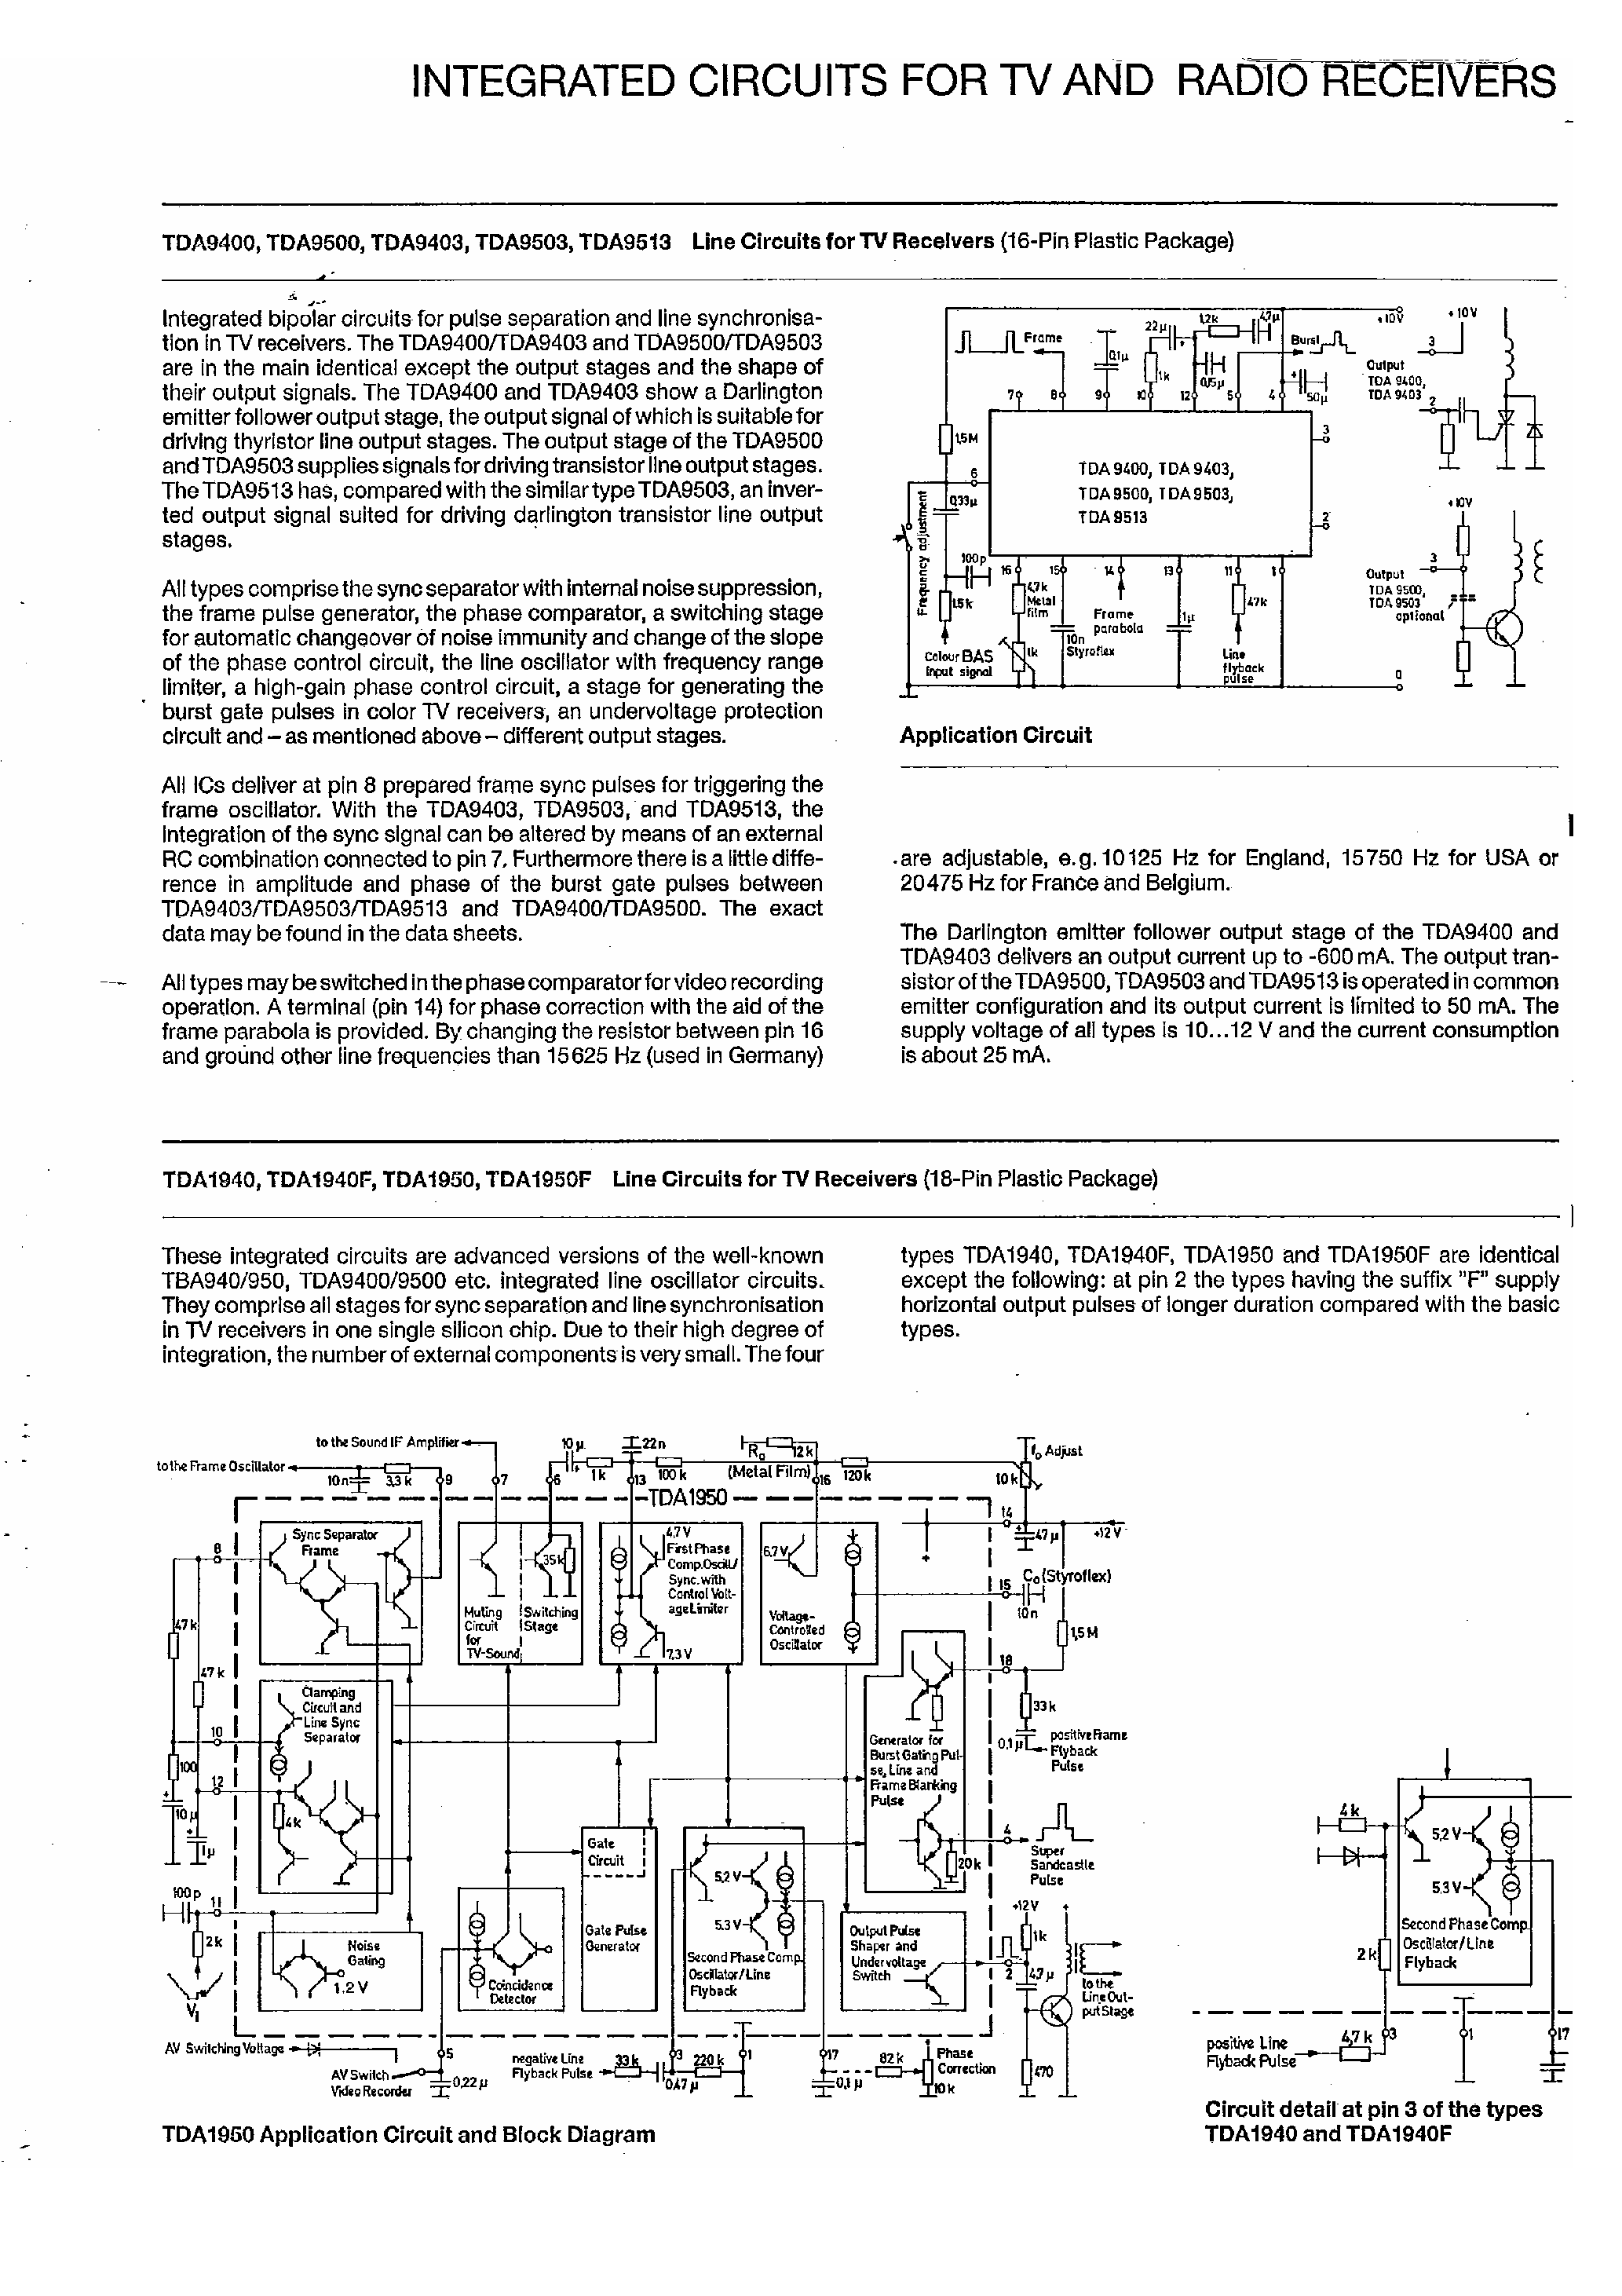 Datasheet TDA1940 - Integrated Circuit for TV and Radio Receivers page 1